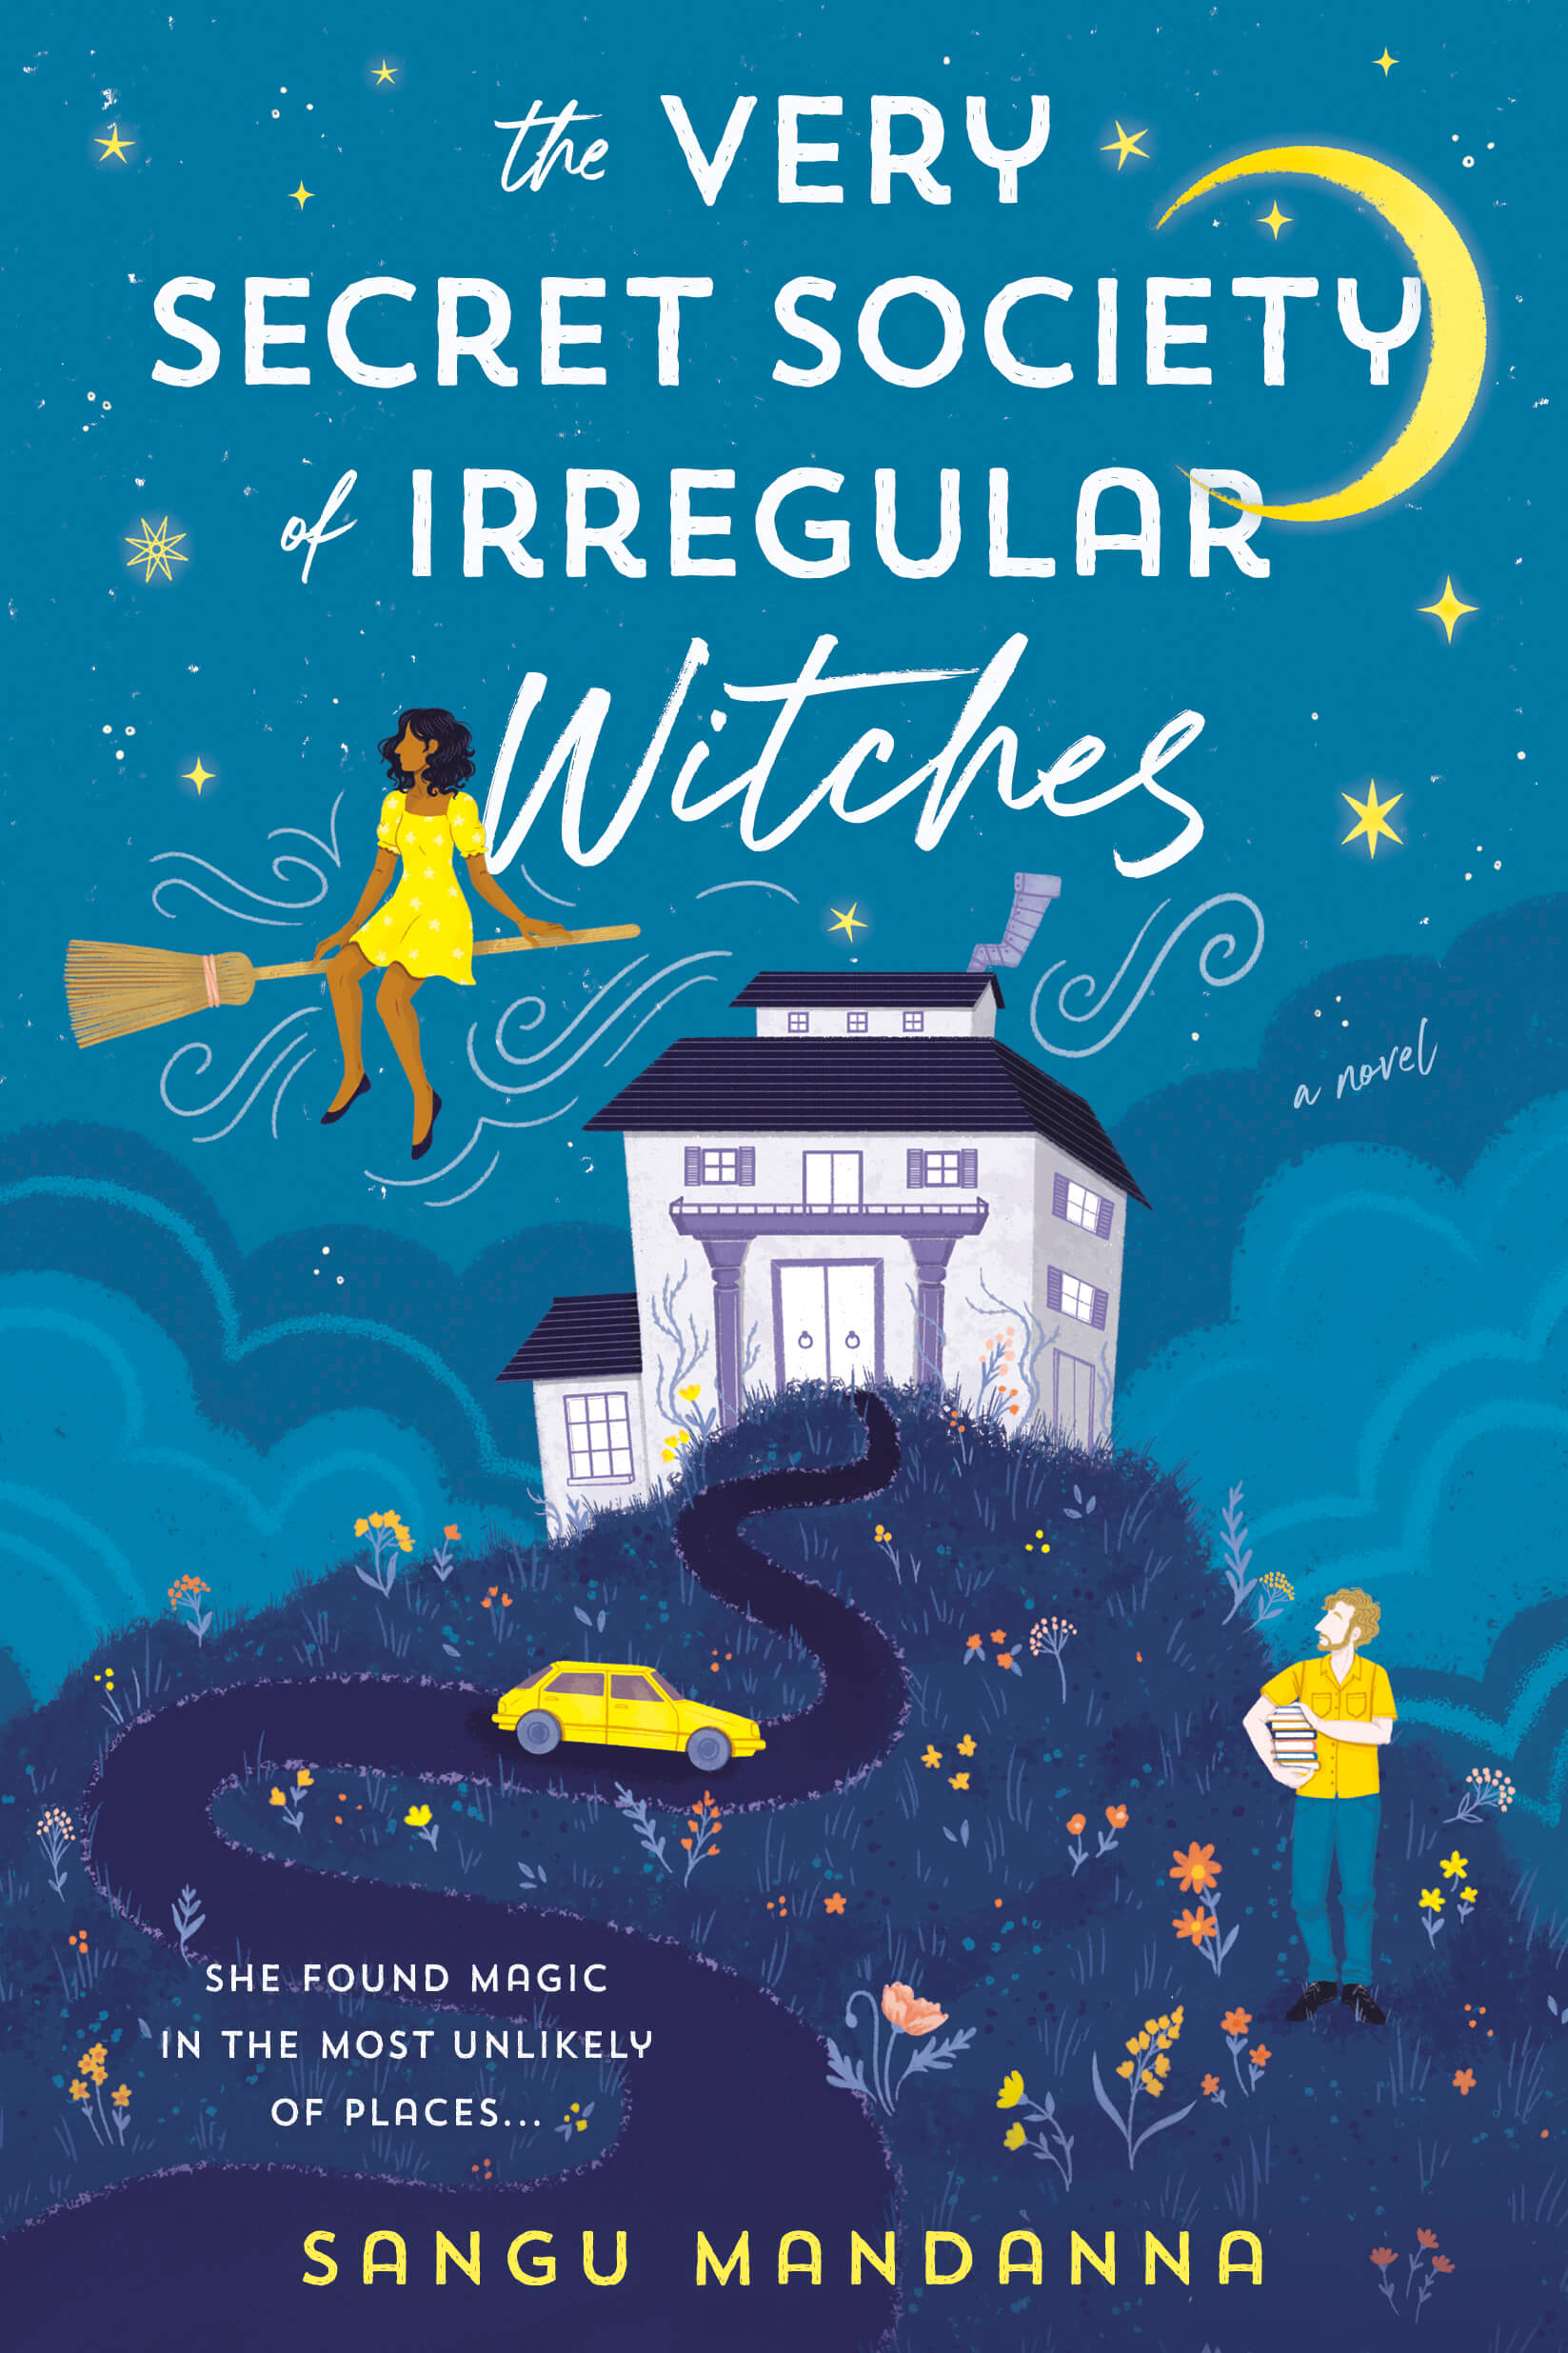 The Very Secret Society of Irregular Witches books